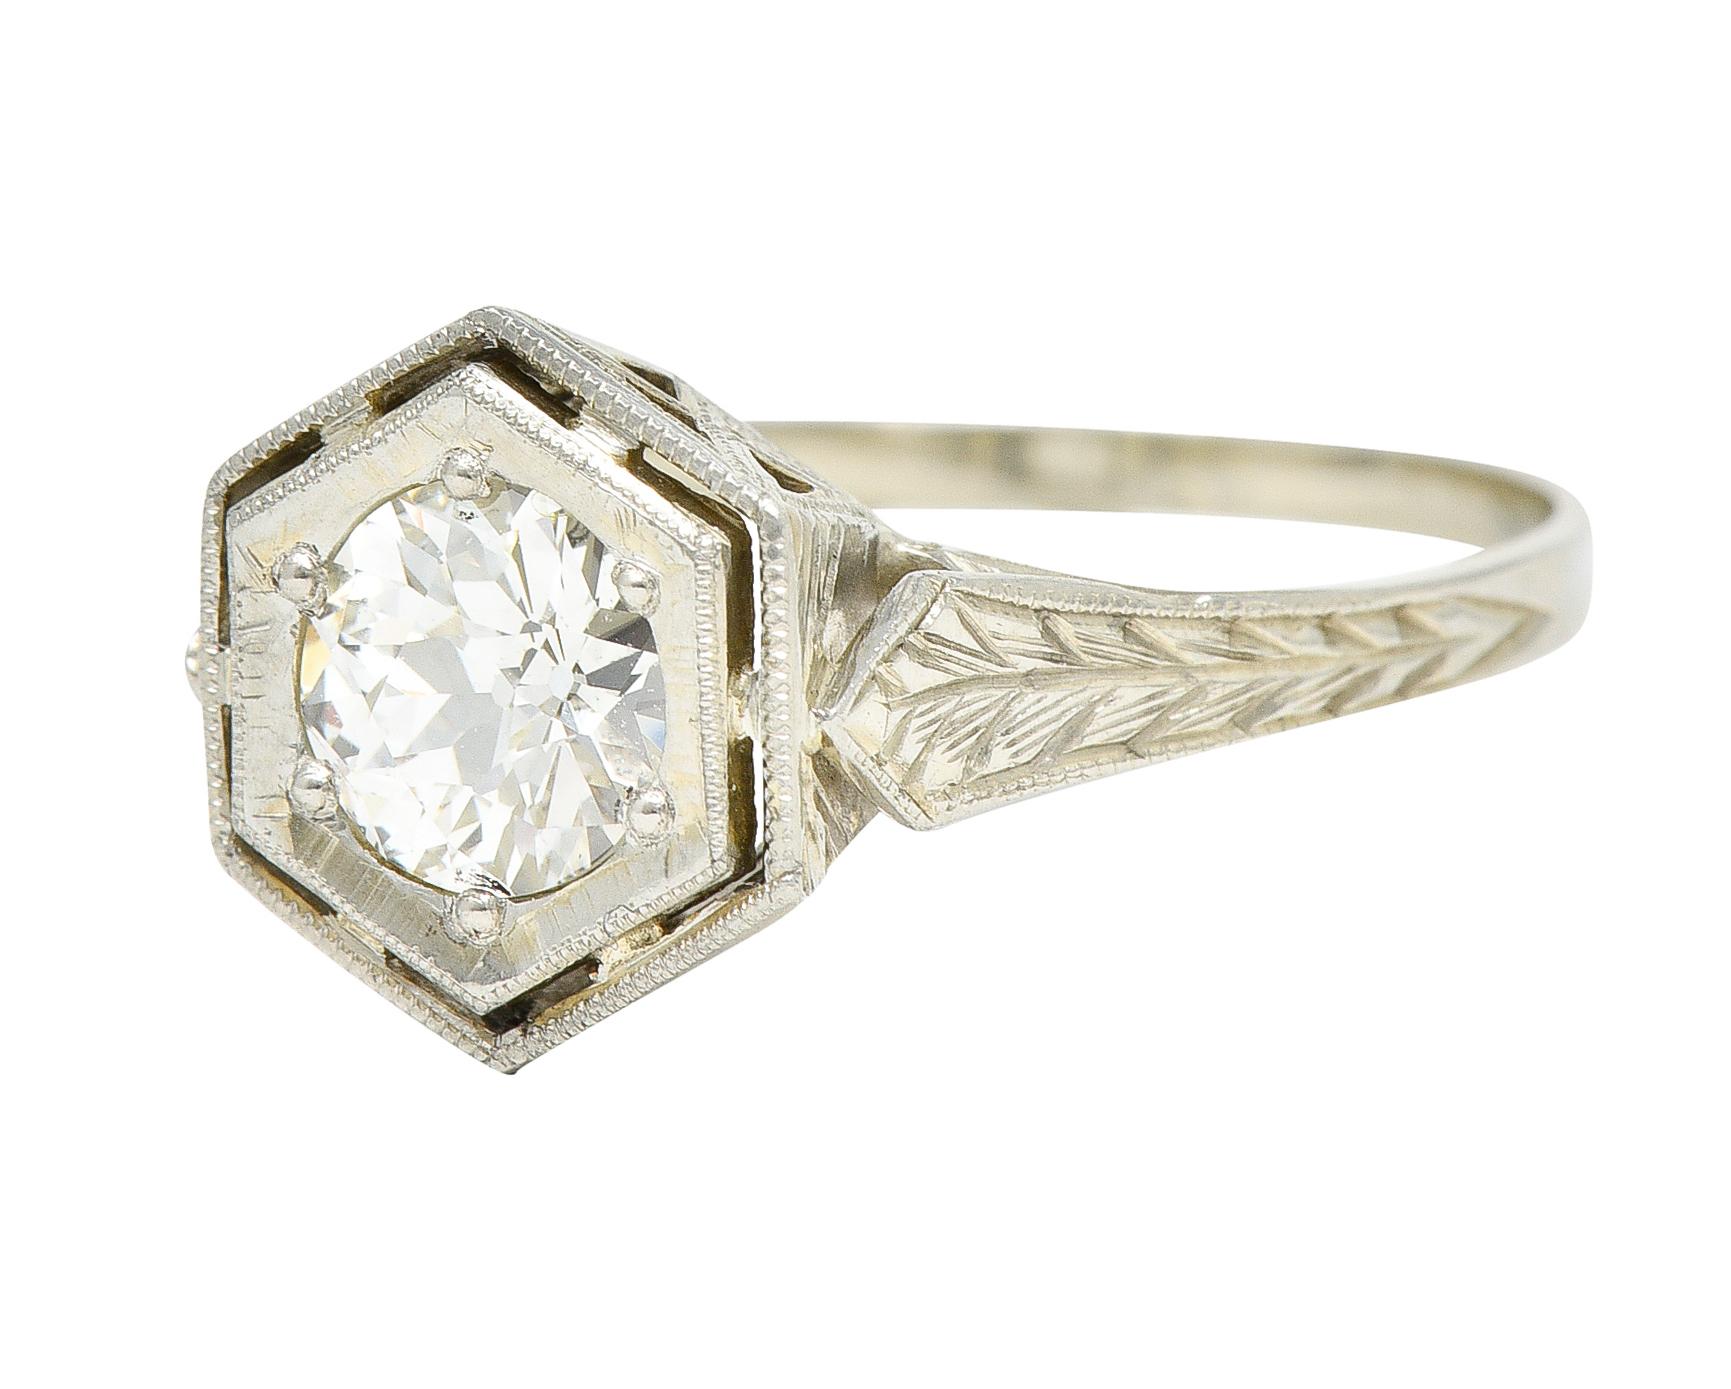 Art Deco 0.74 Carat Old European Cut Diamond 20 Karat White Gold Engagement Ring In Excellent Condition For Sale In Philadelphia, PA